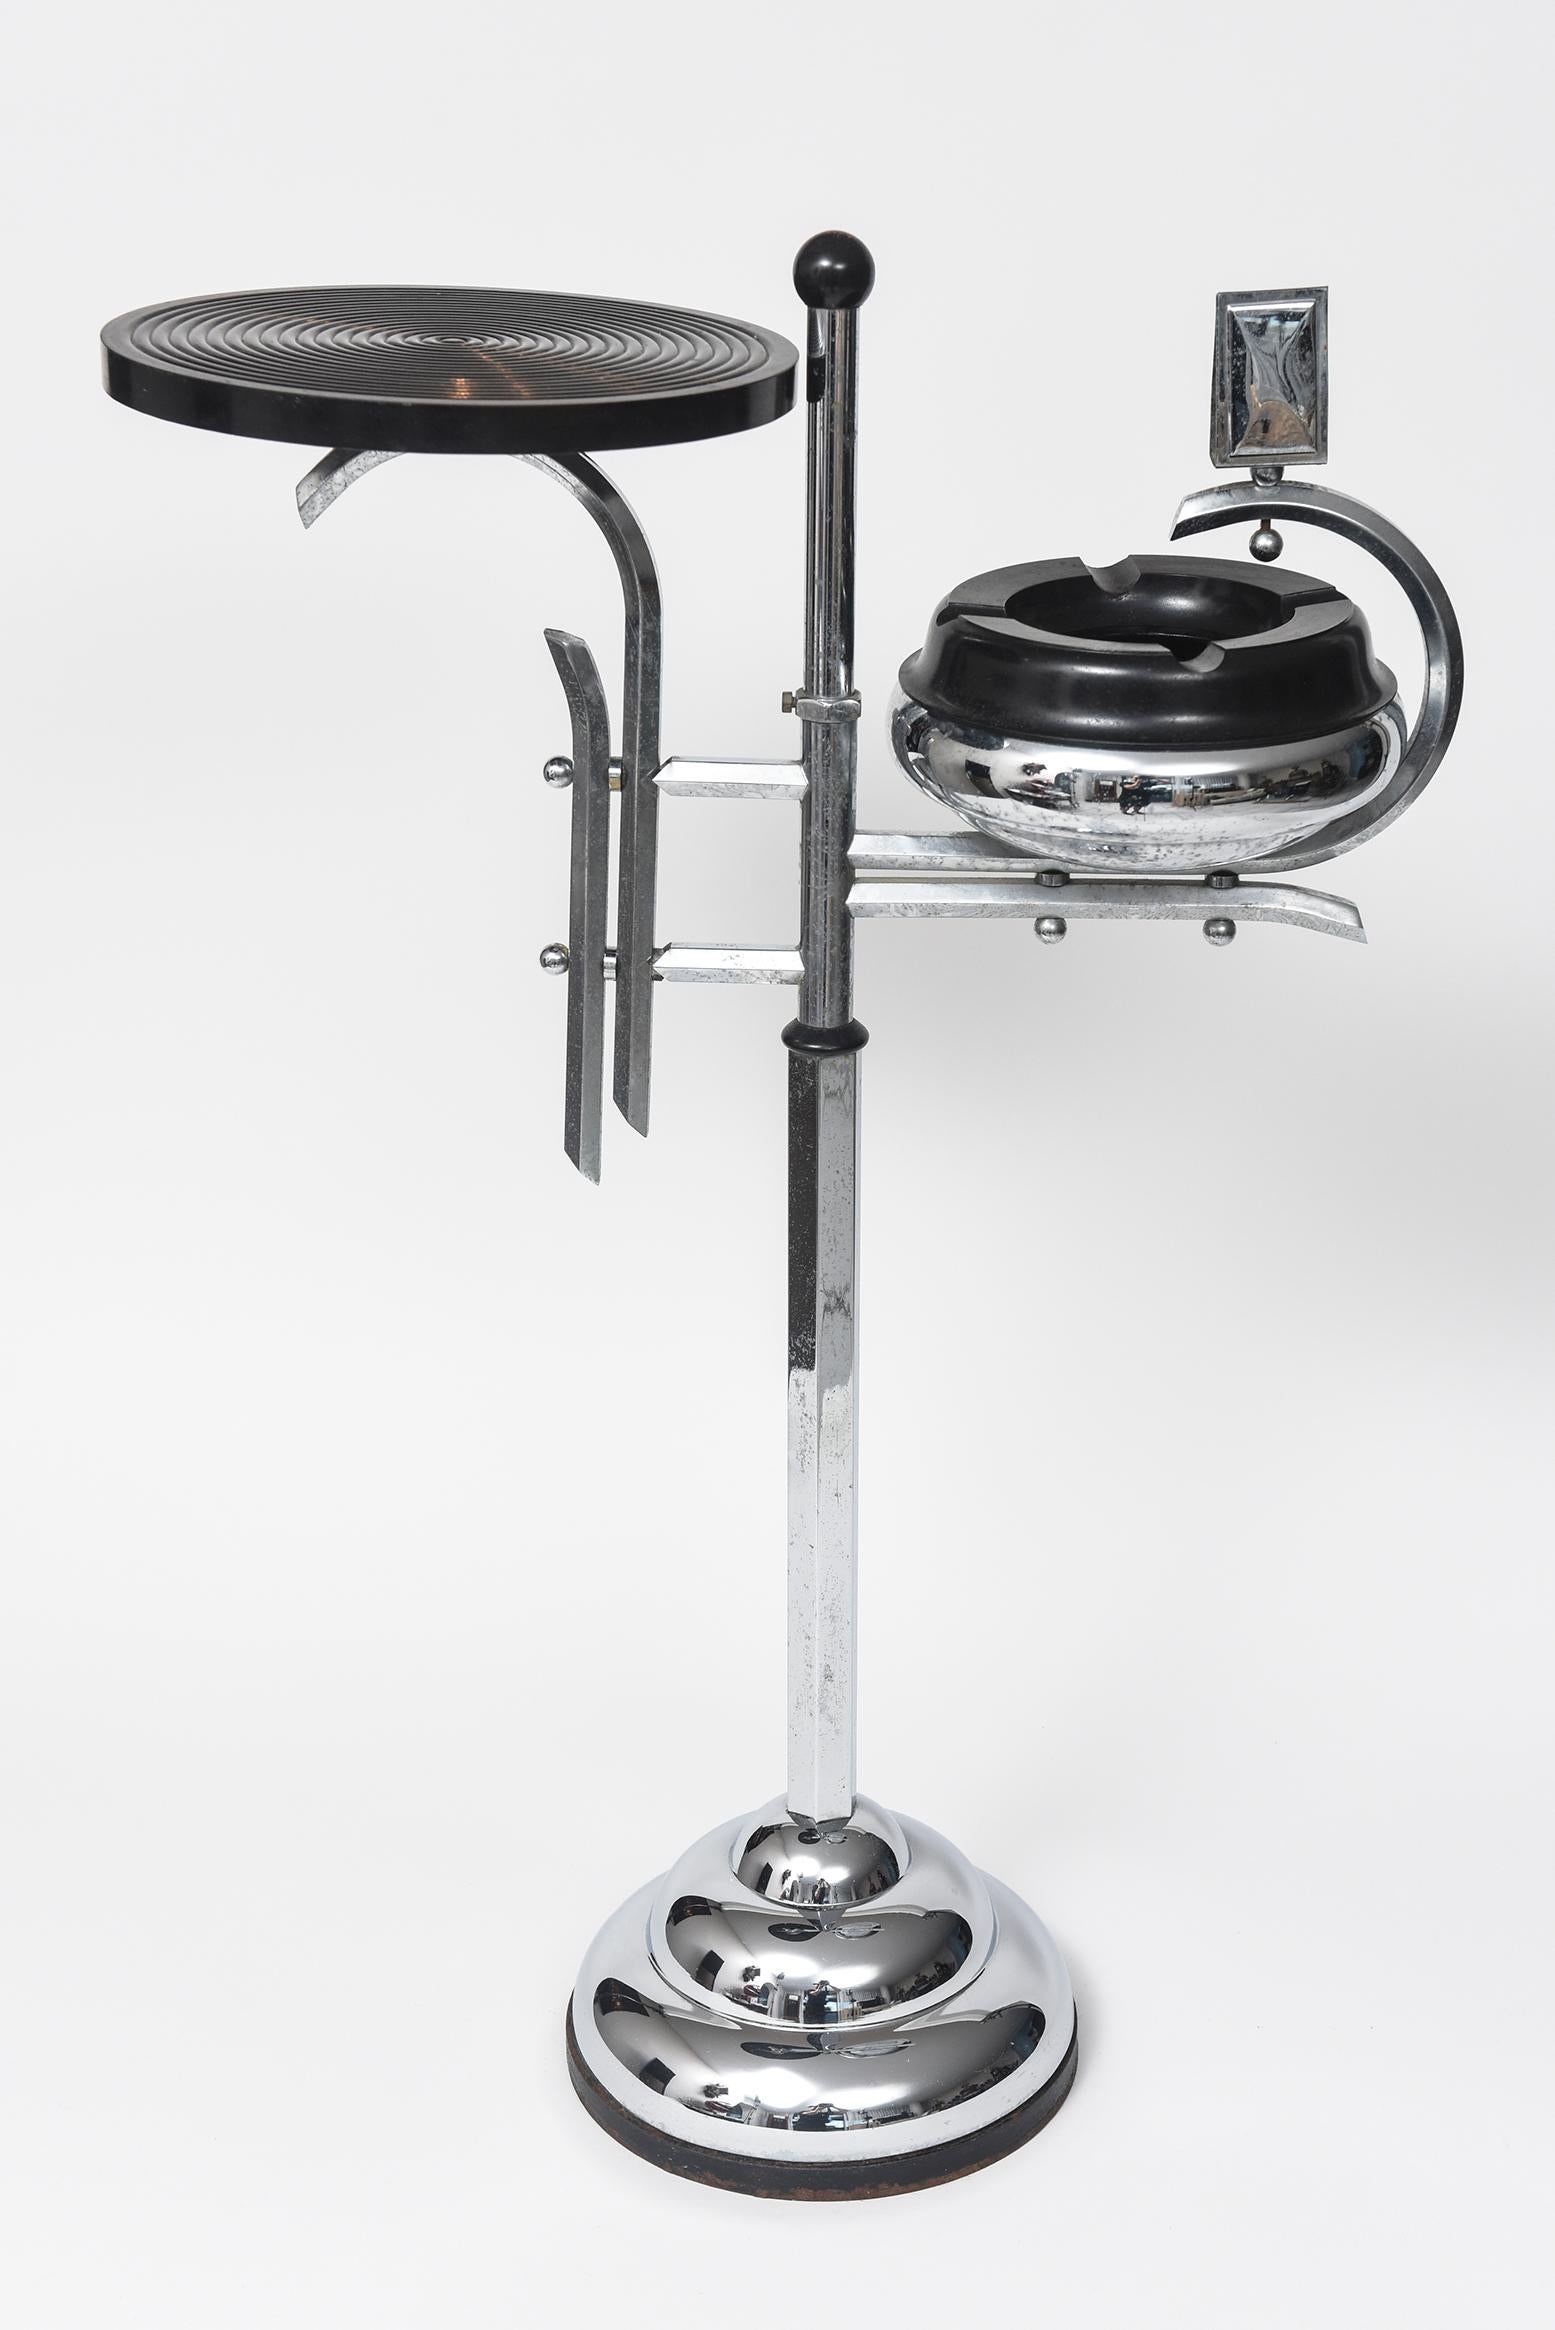 Stunning streamline machine age Art Deco Ashtray stand smoking table. Perfect for holding a snack or drink as well as your cigarette or cigar. The previous owner used it in their bathroom to hold a candle and matches. It is make of chrome and